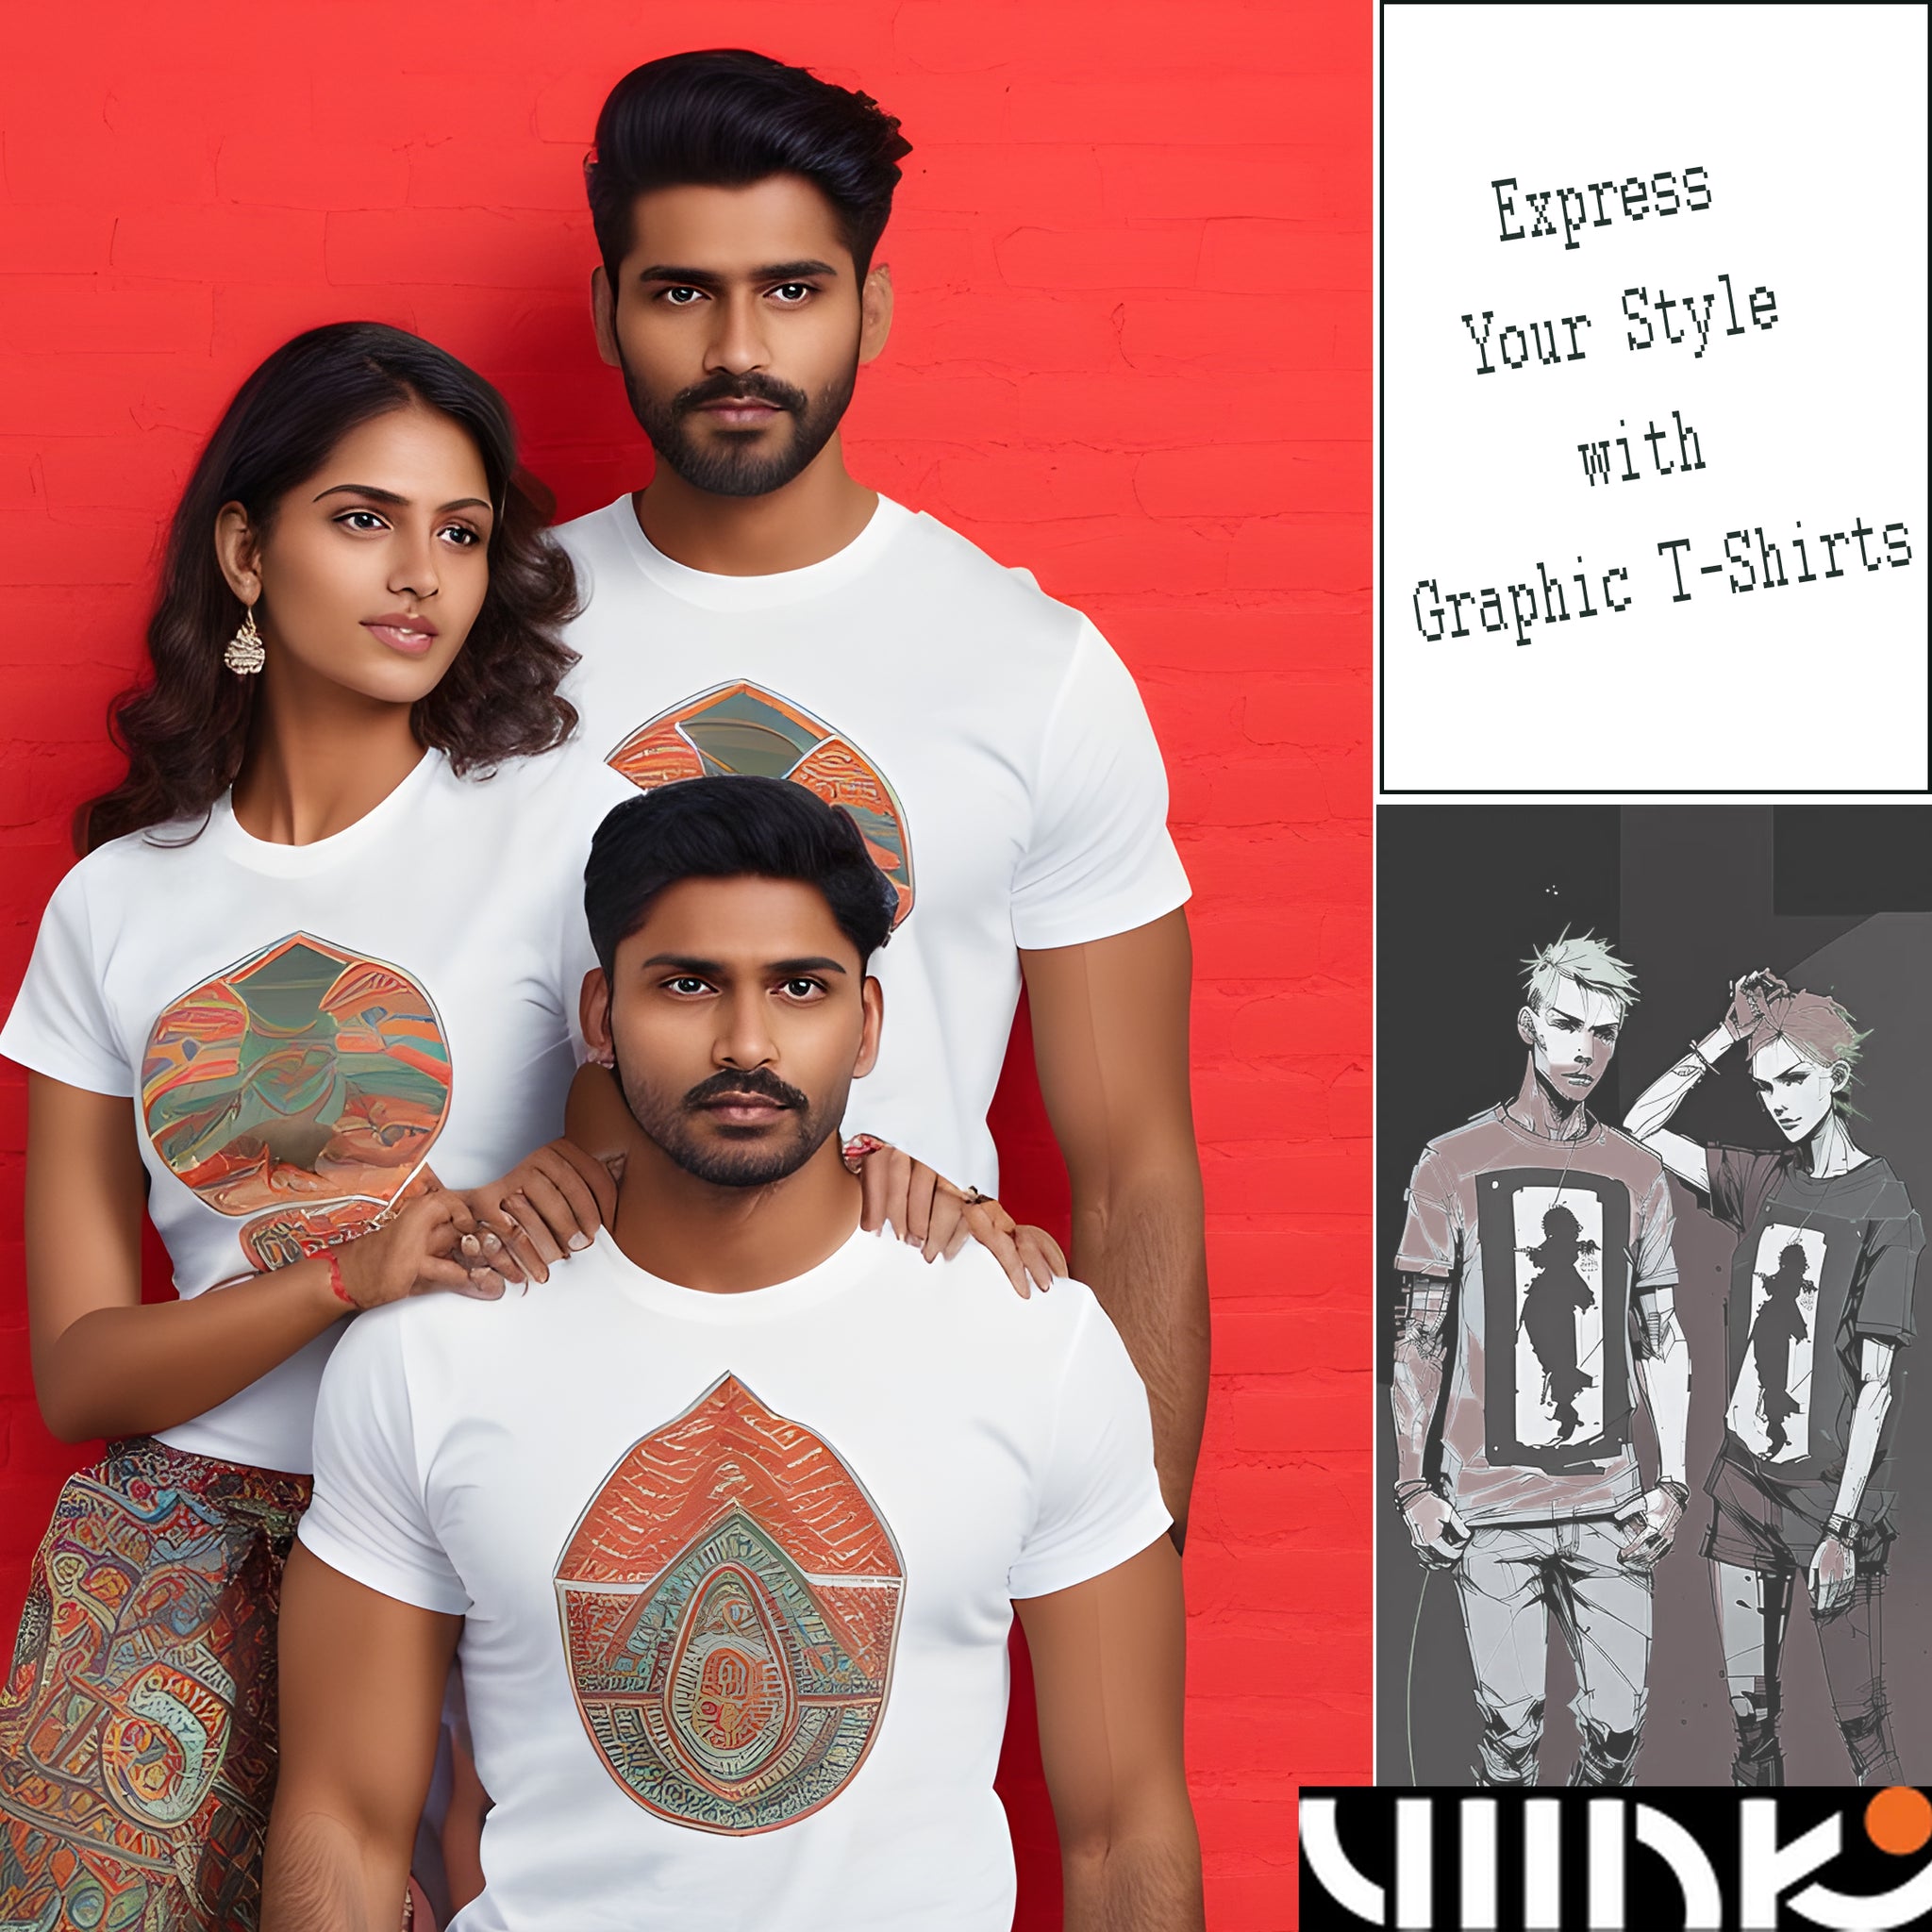 Express Your Style with Graphic T-Shirts